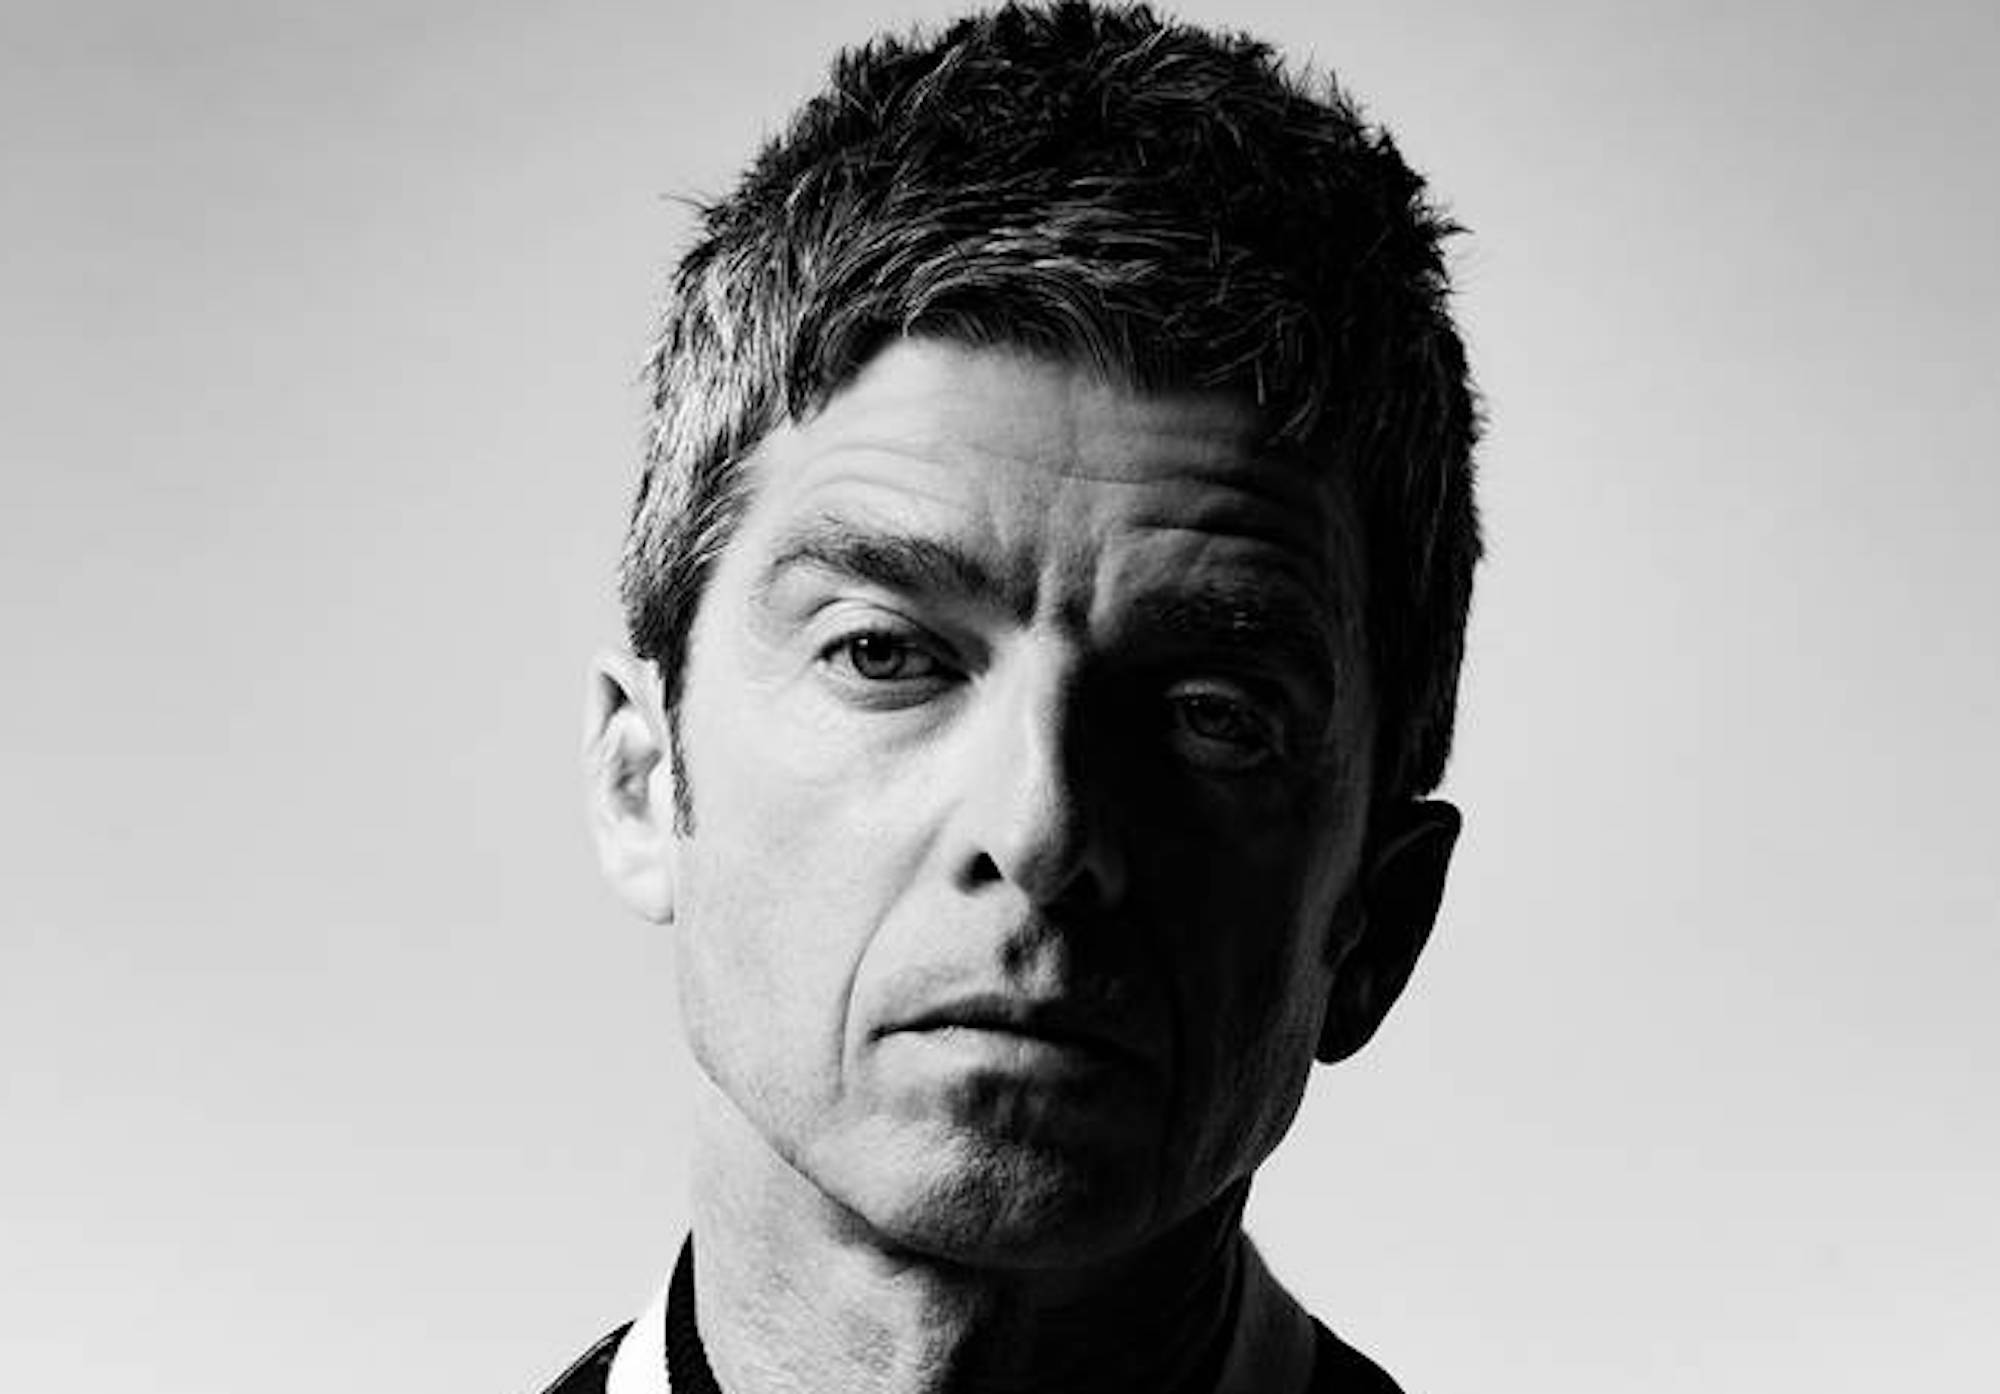 Noel Gallagher Plans Acoustic Tour of Oasis Songs, Got ‘Emotional” Watching Band’s Doc